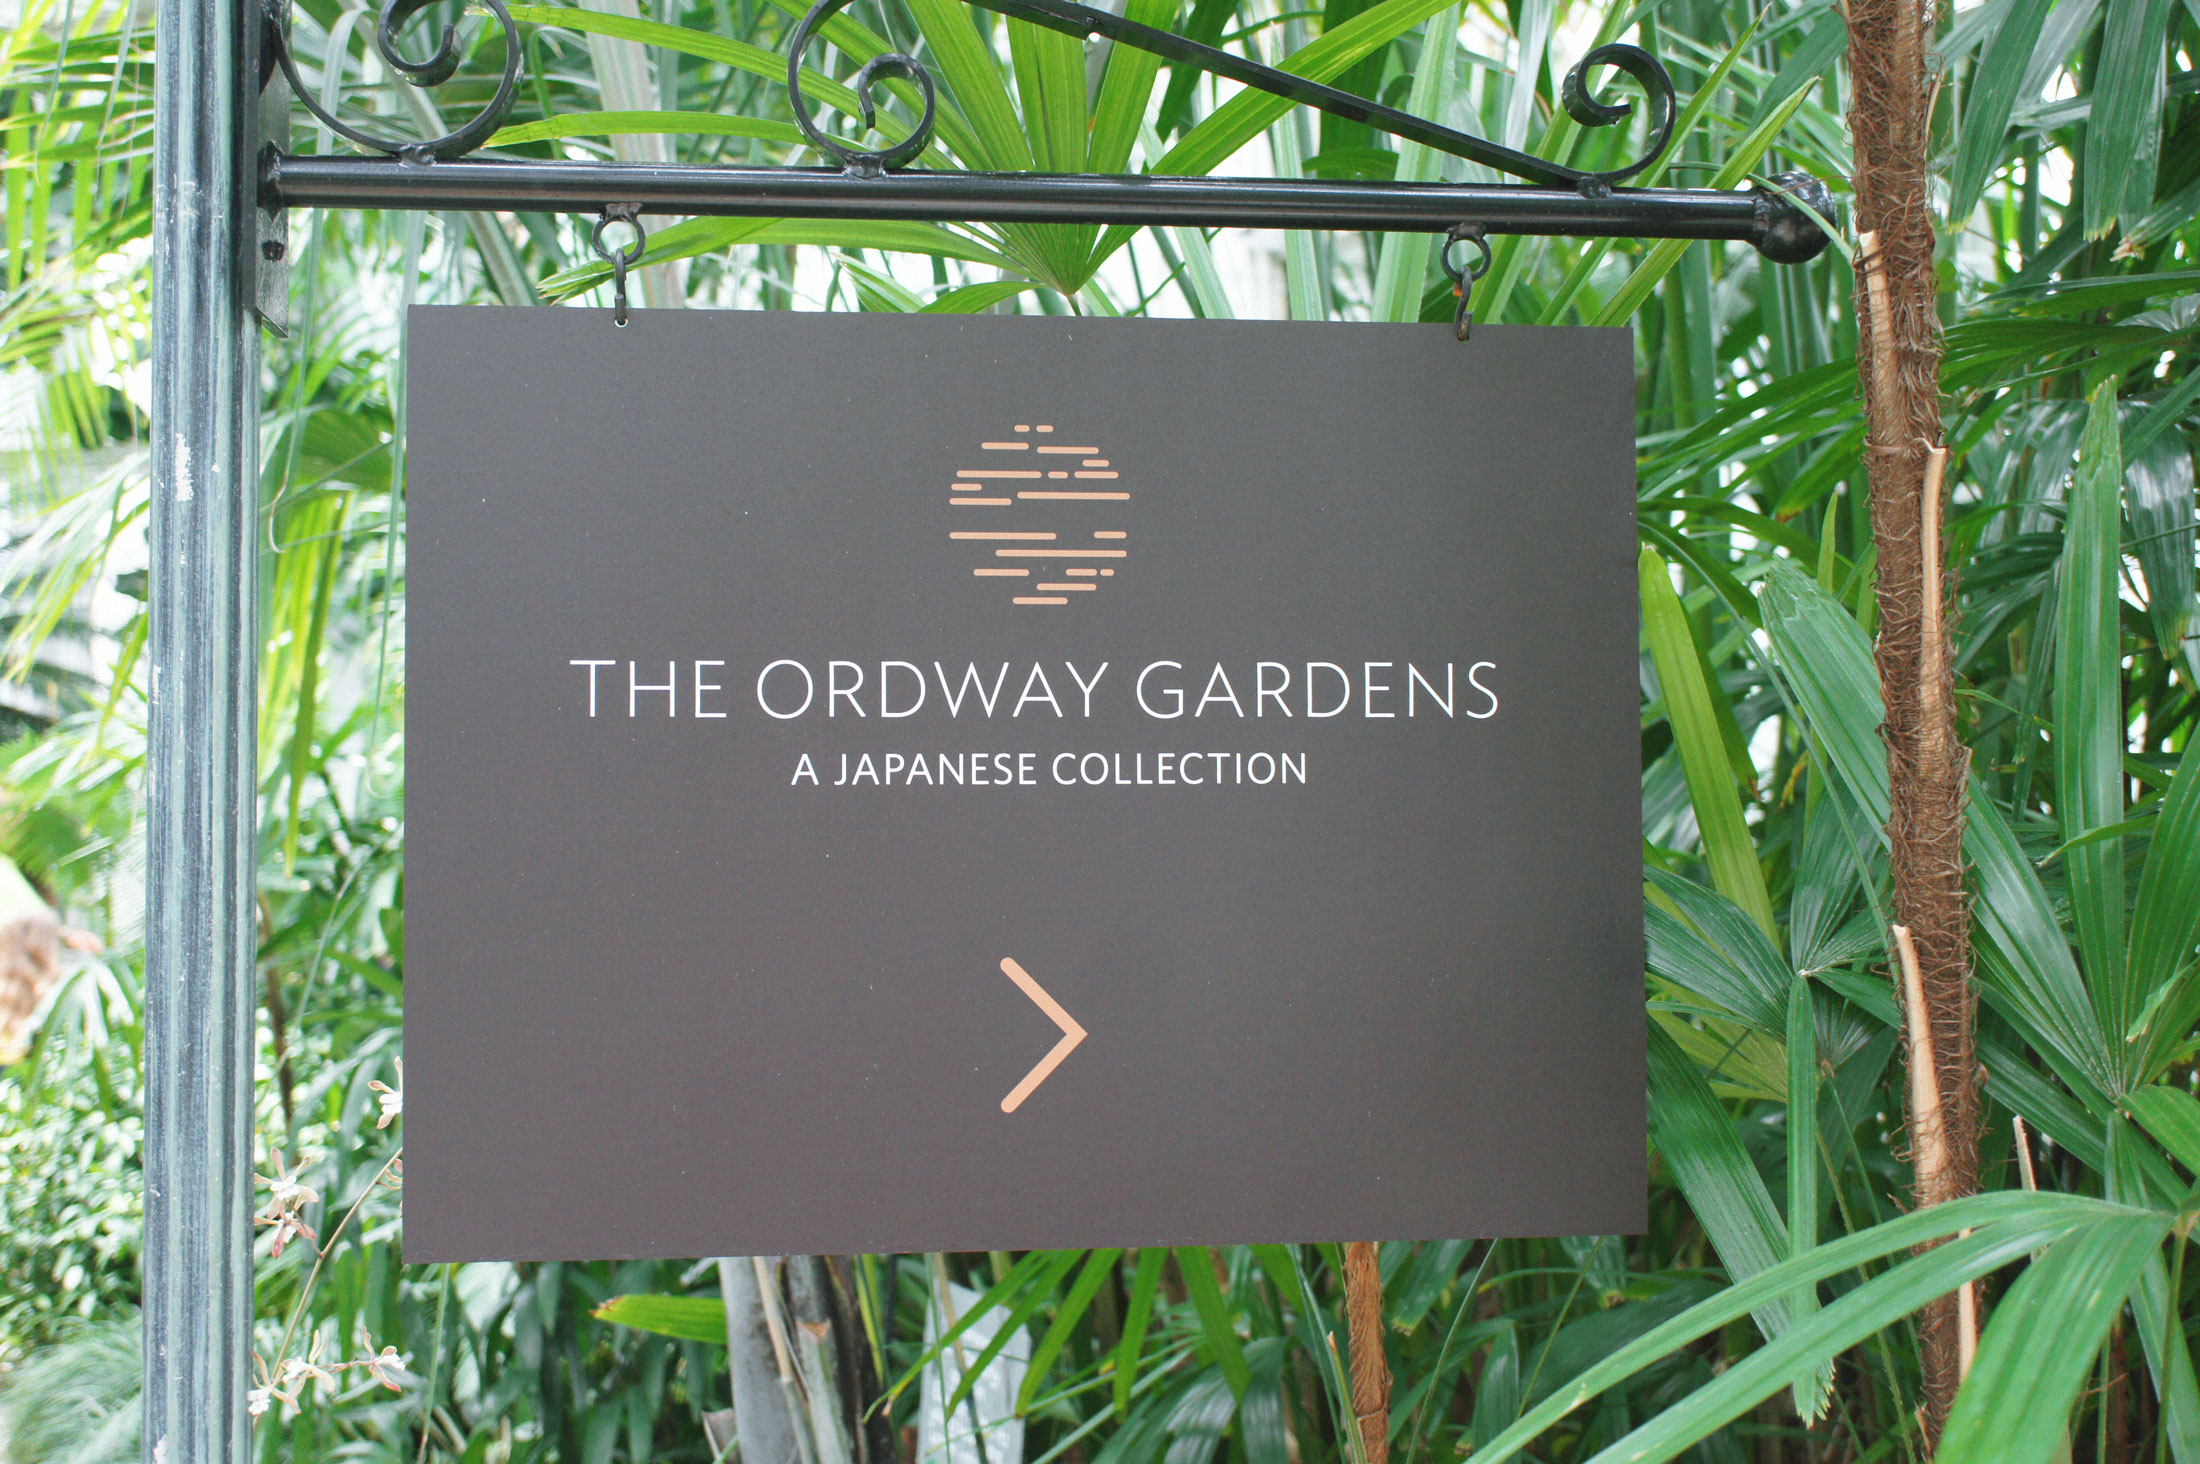 The Ordway Gardens